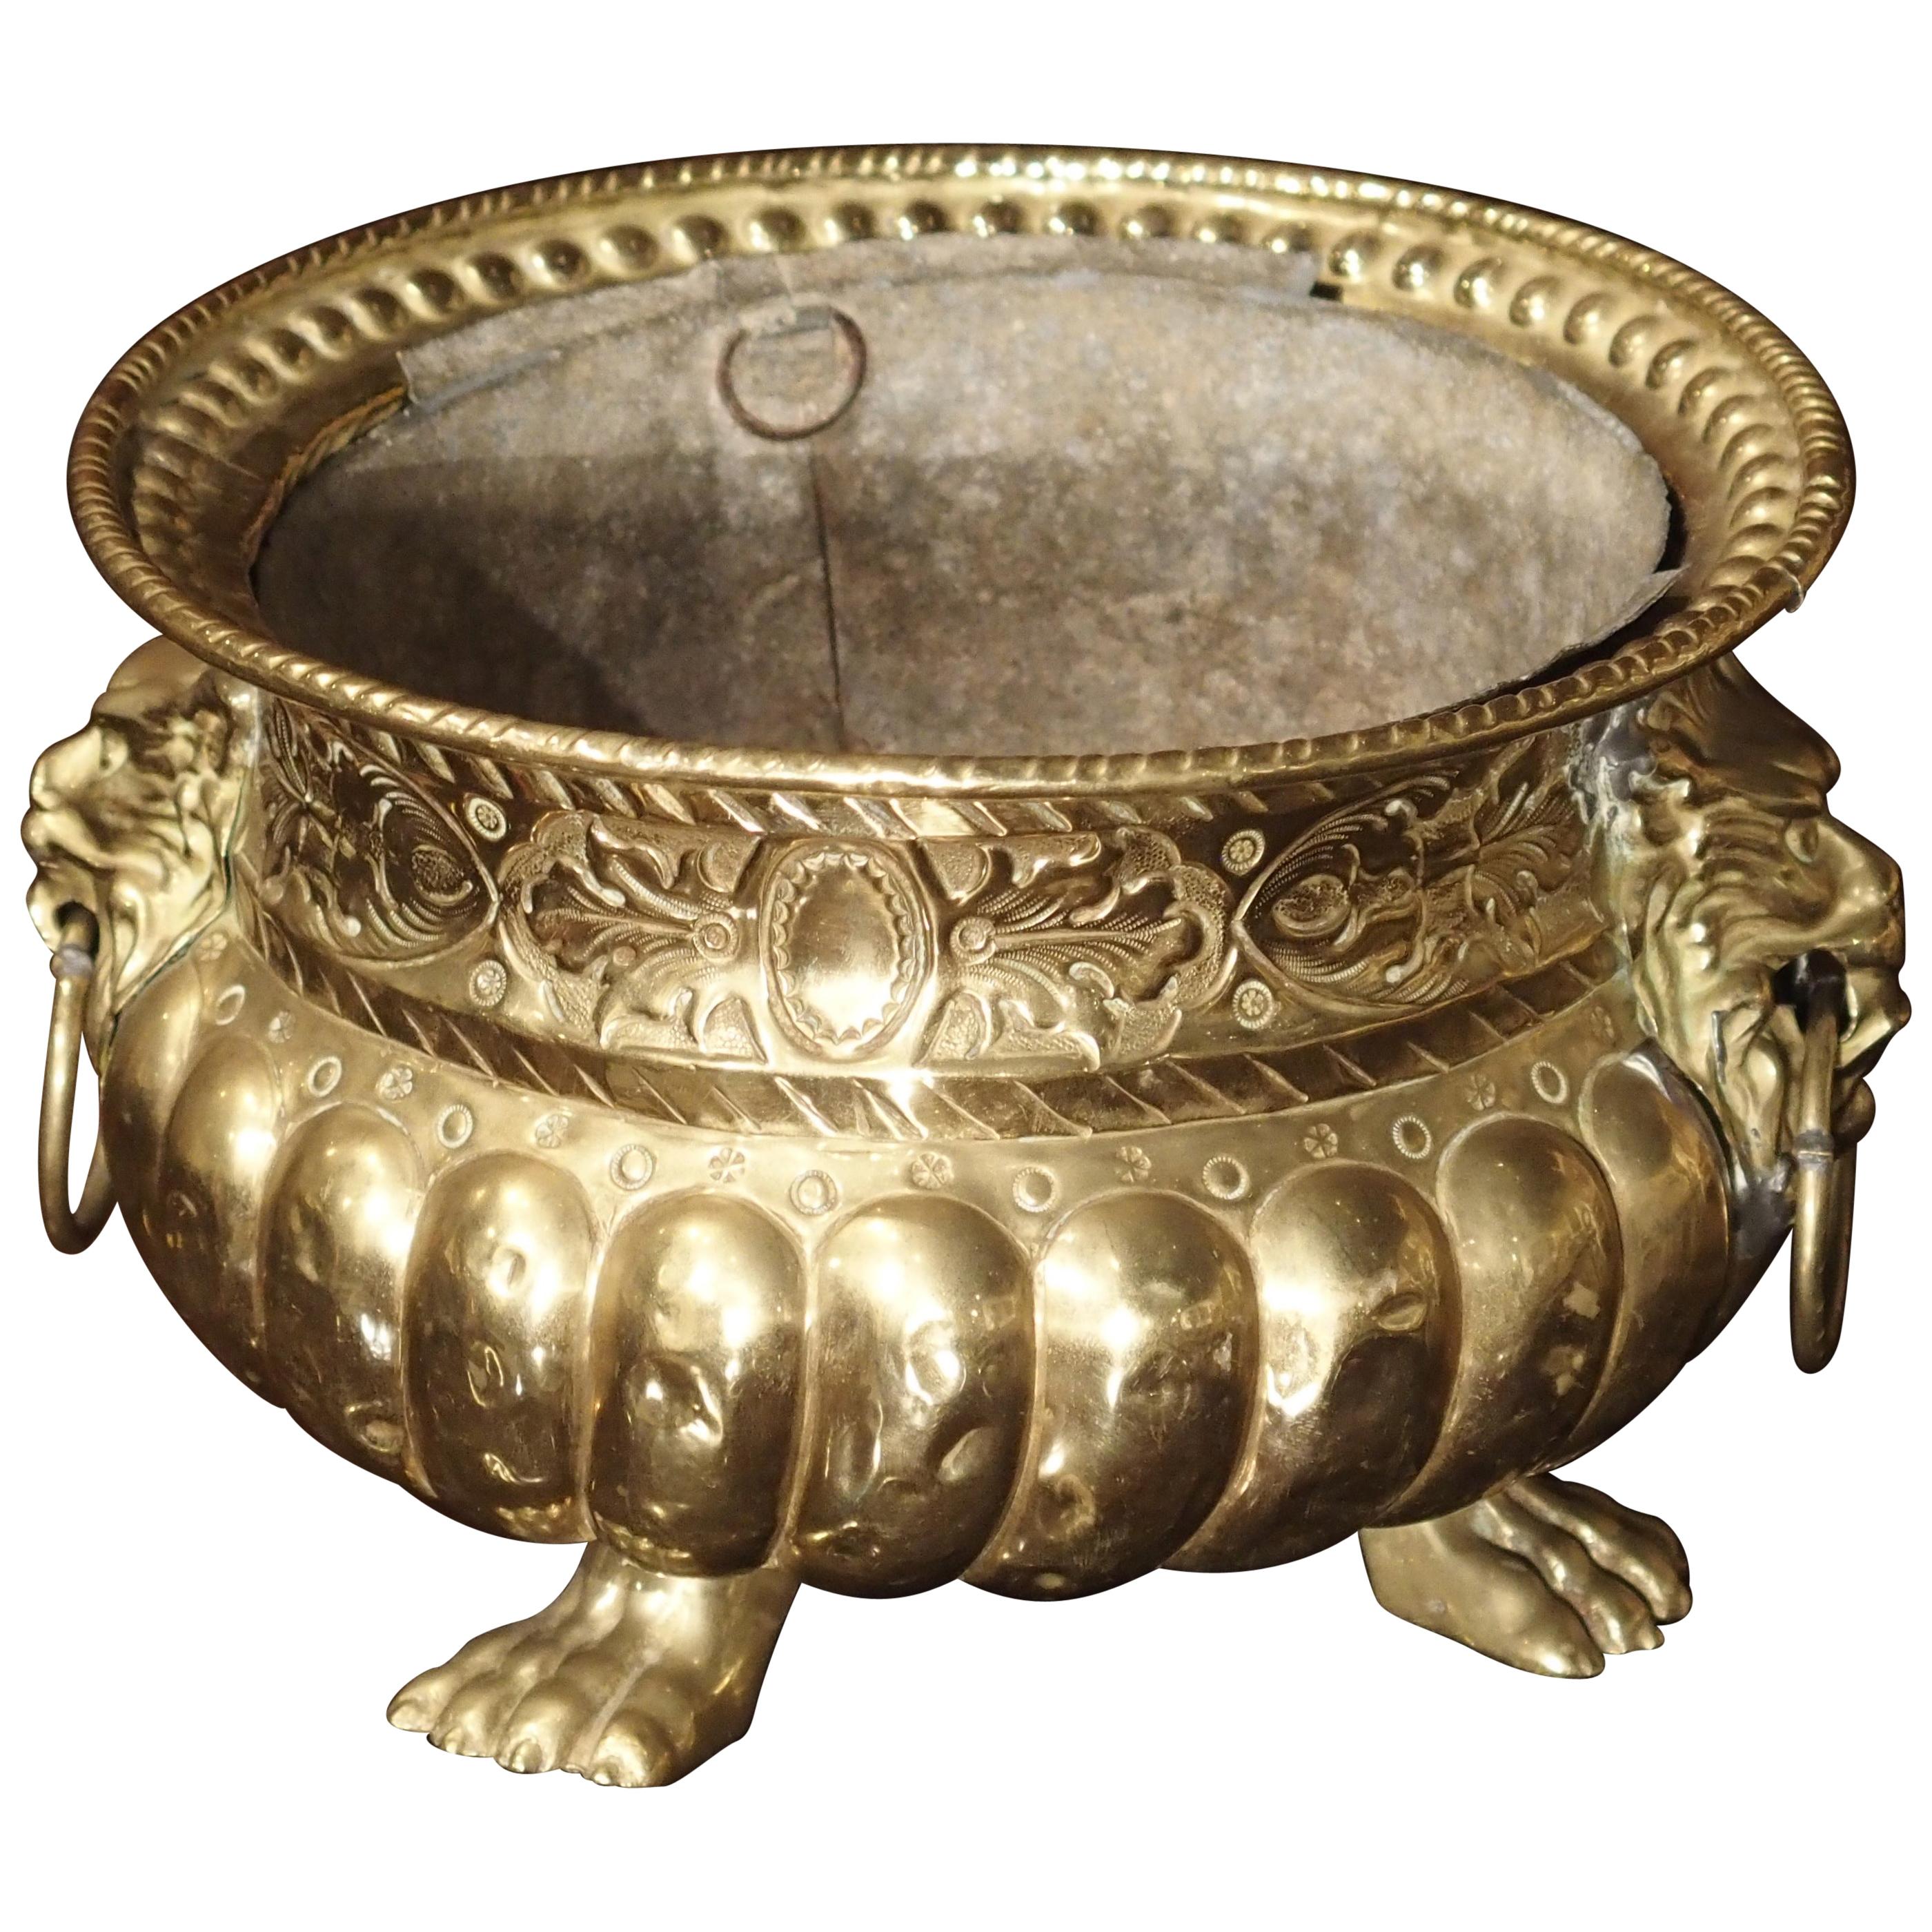 Early 1900s Brass Repousse Jardinière from France